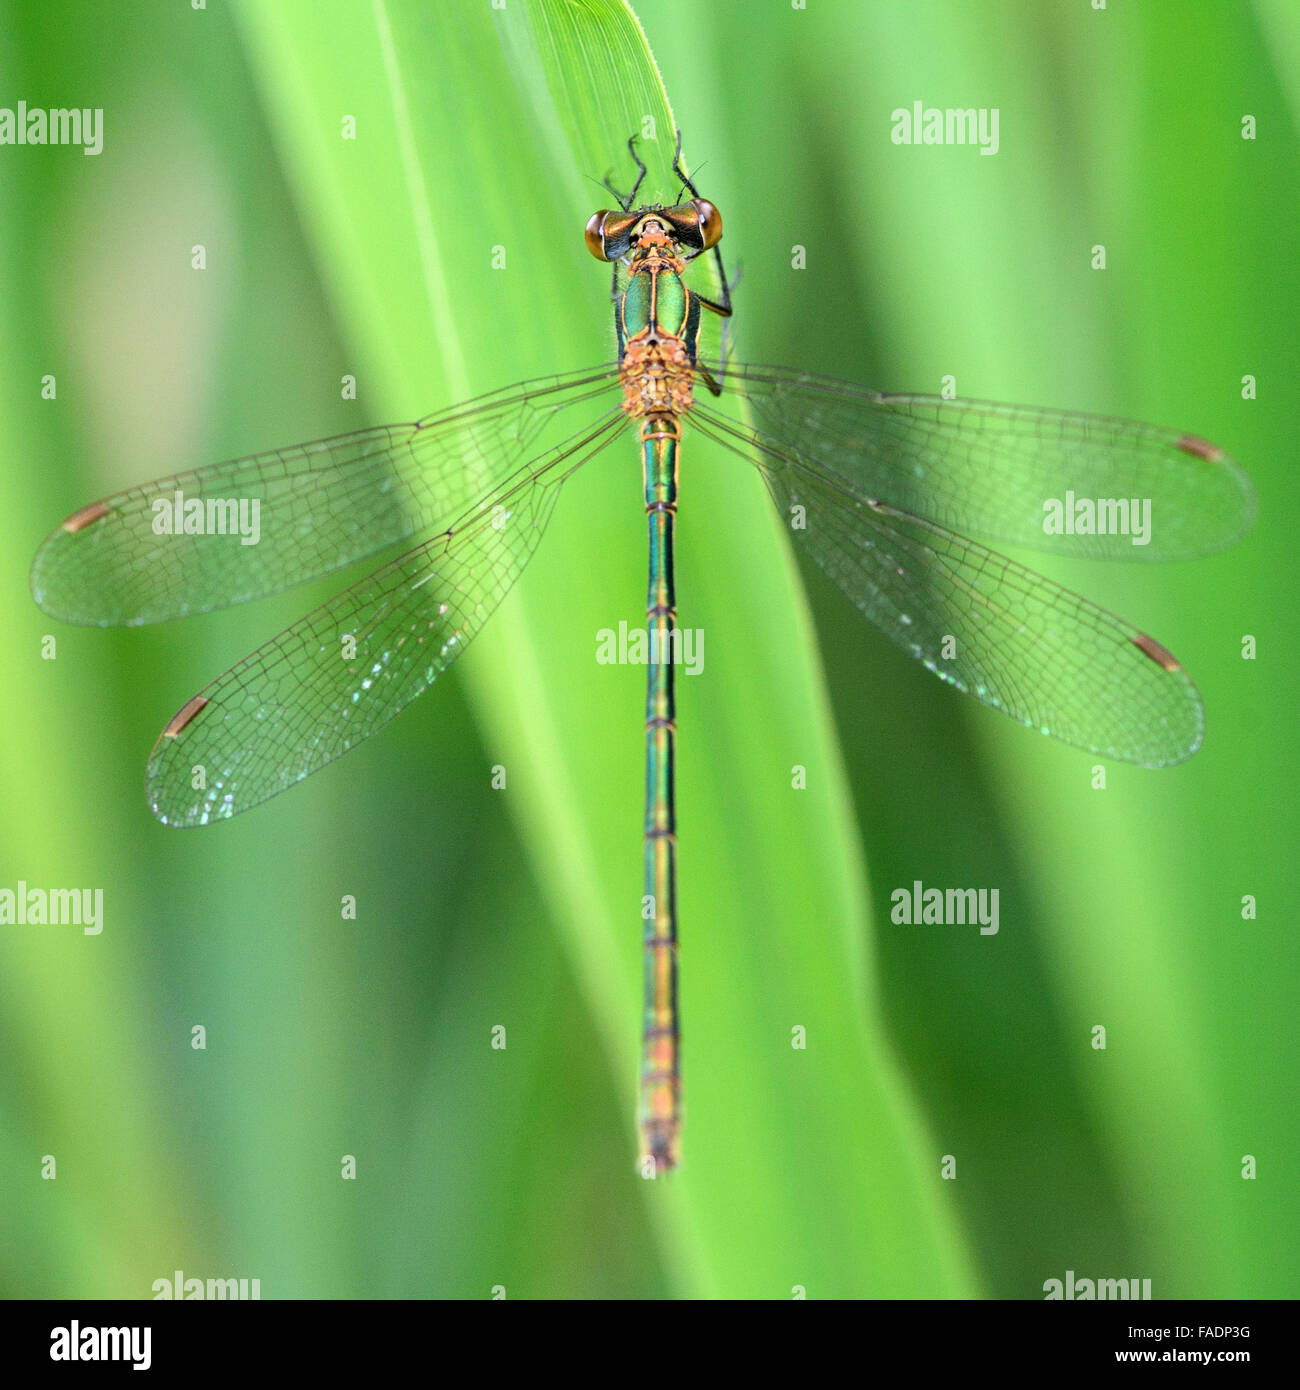 Emerald damselfly (Lestes sponsa). A local damselfly at rest on vegetation, with wings held in the typical open posture Stock Photo